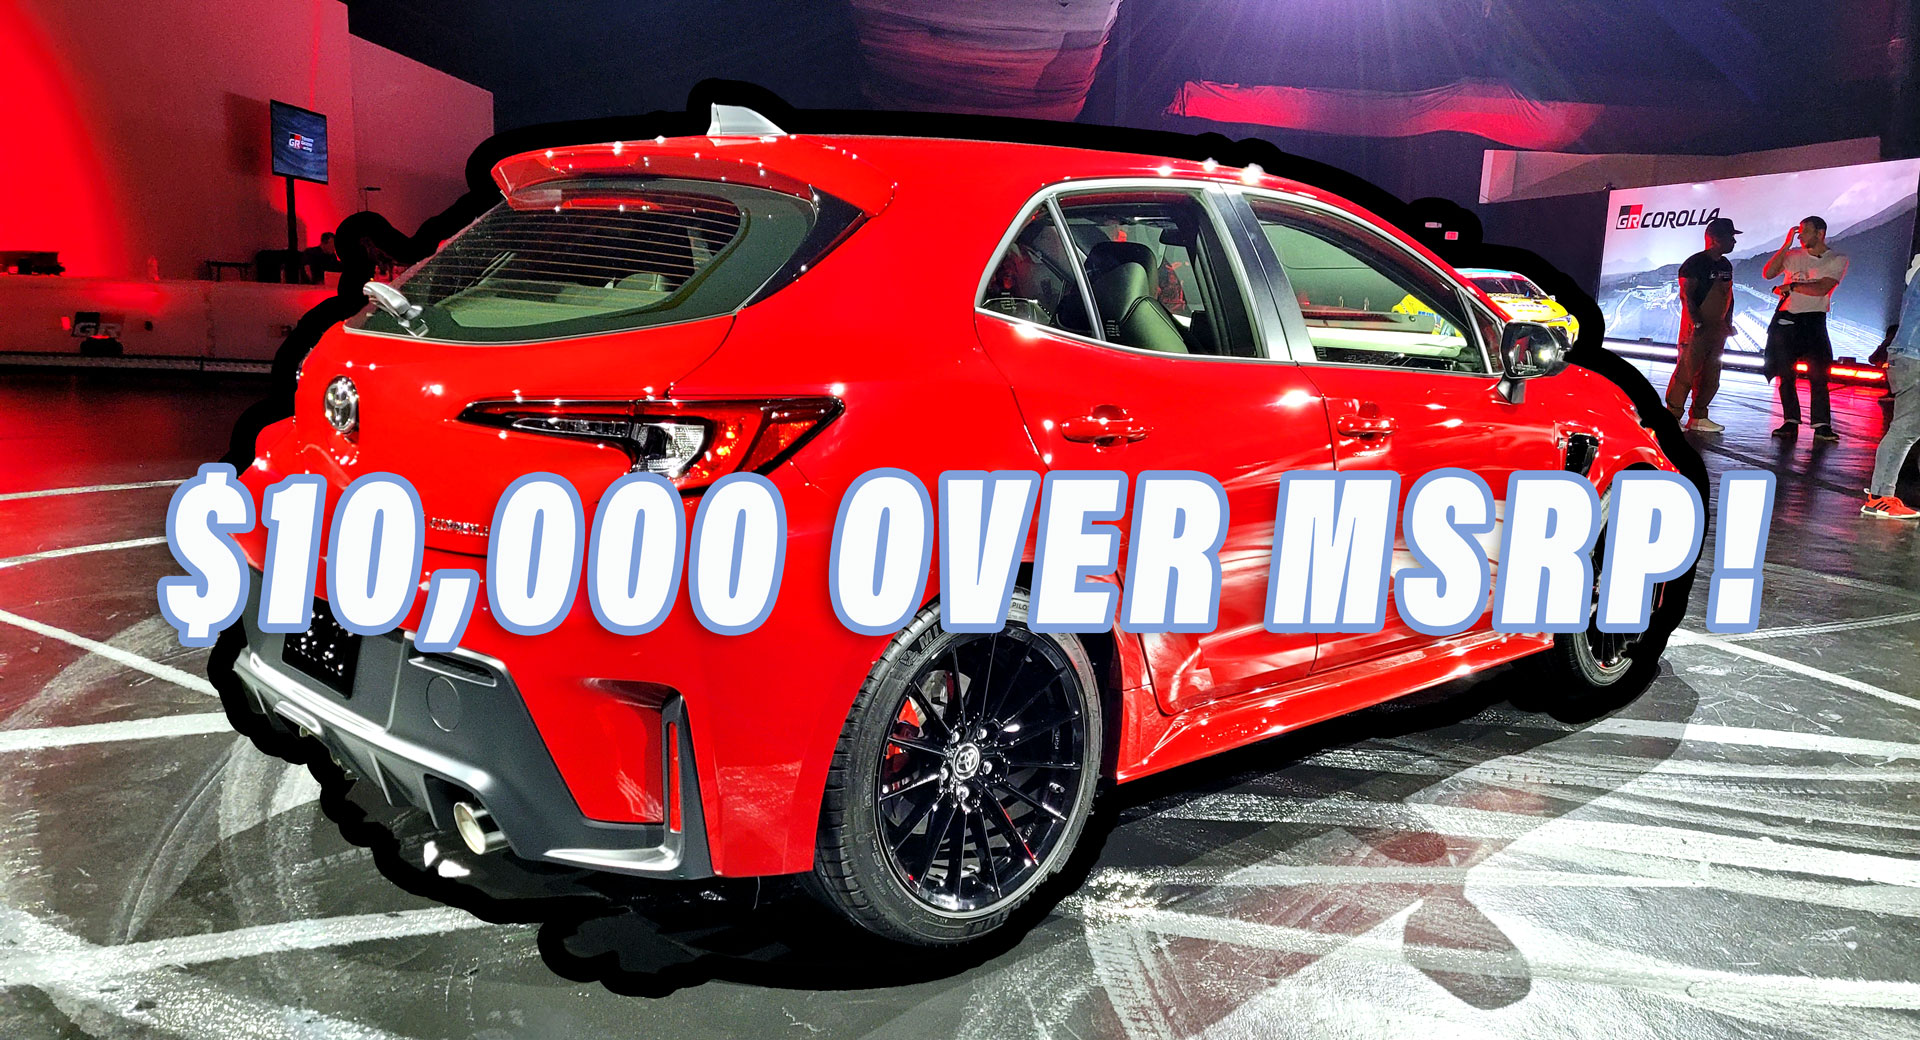 The 2022 Toyota Corolla Is The Perfect Inexpensive Car We Have Been Waiting  For